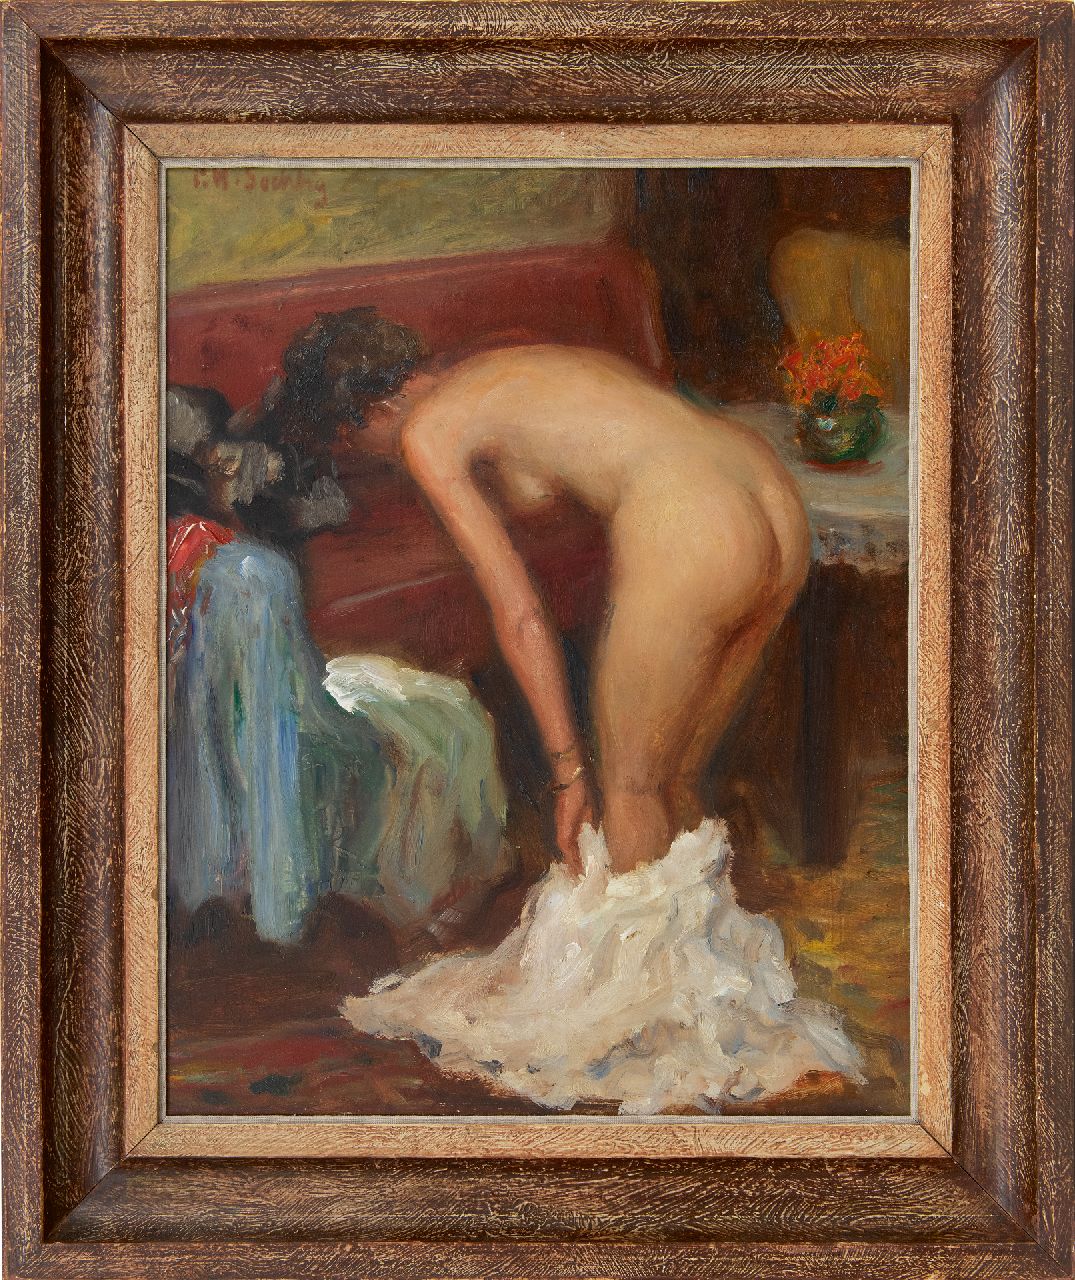 Söchtig P.W.  | Paul Werner Söchtig | Paintings offered for sale | A female nude standing in a boudoir, oil on board 50.3 x 40.1 cm, signed u.l.